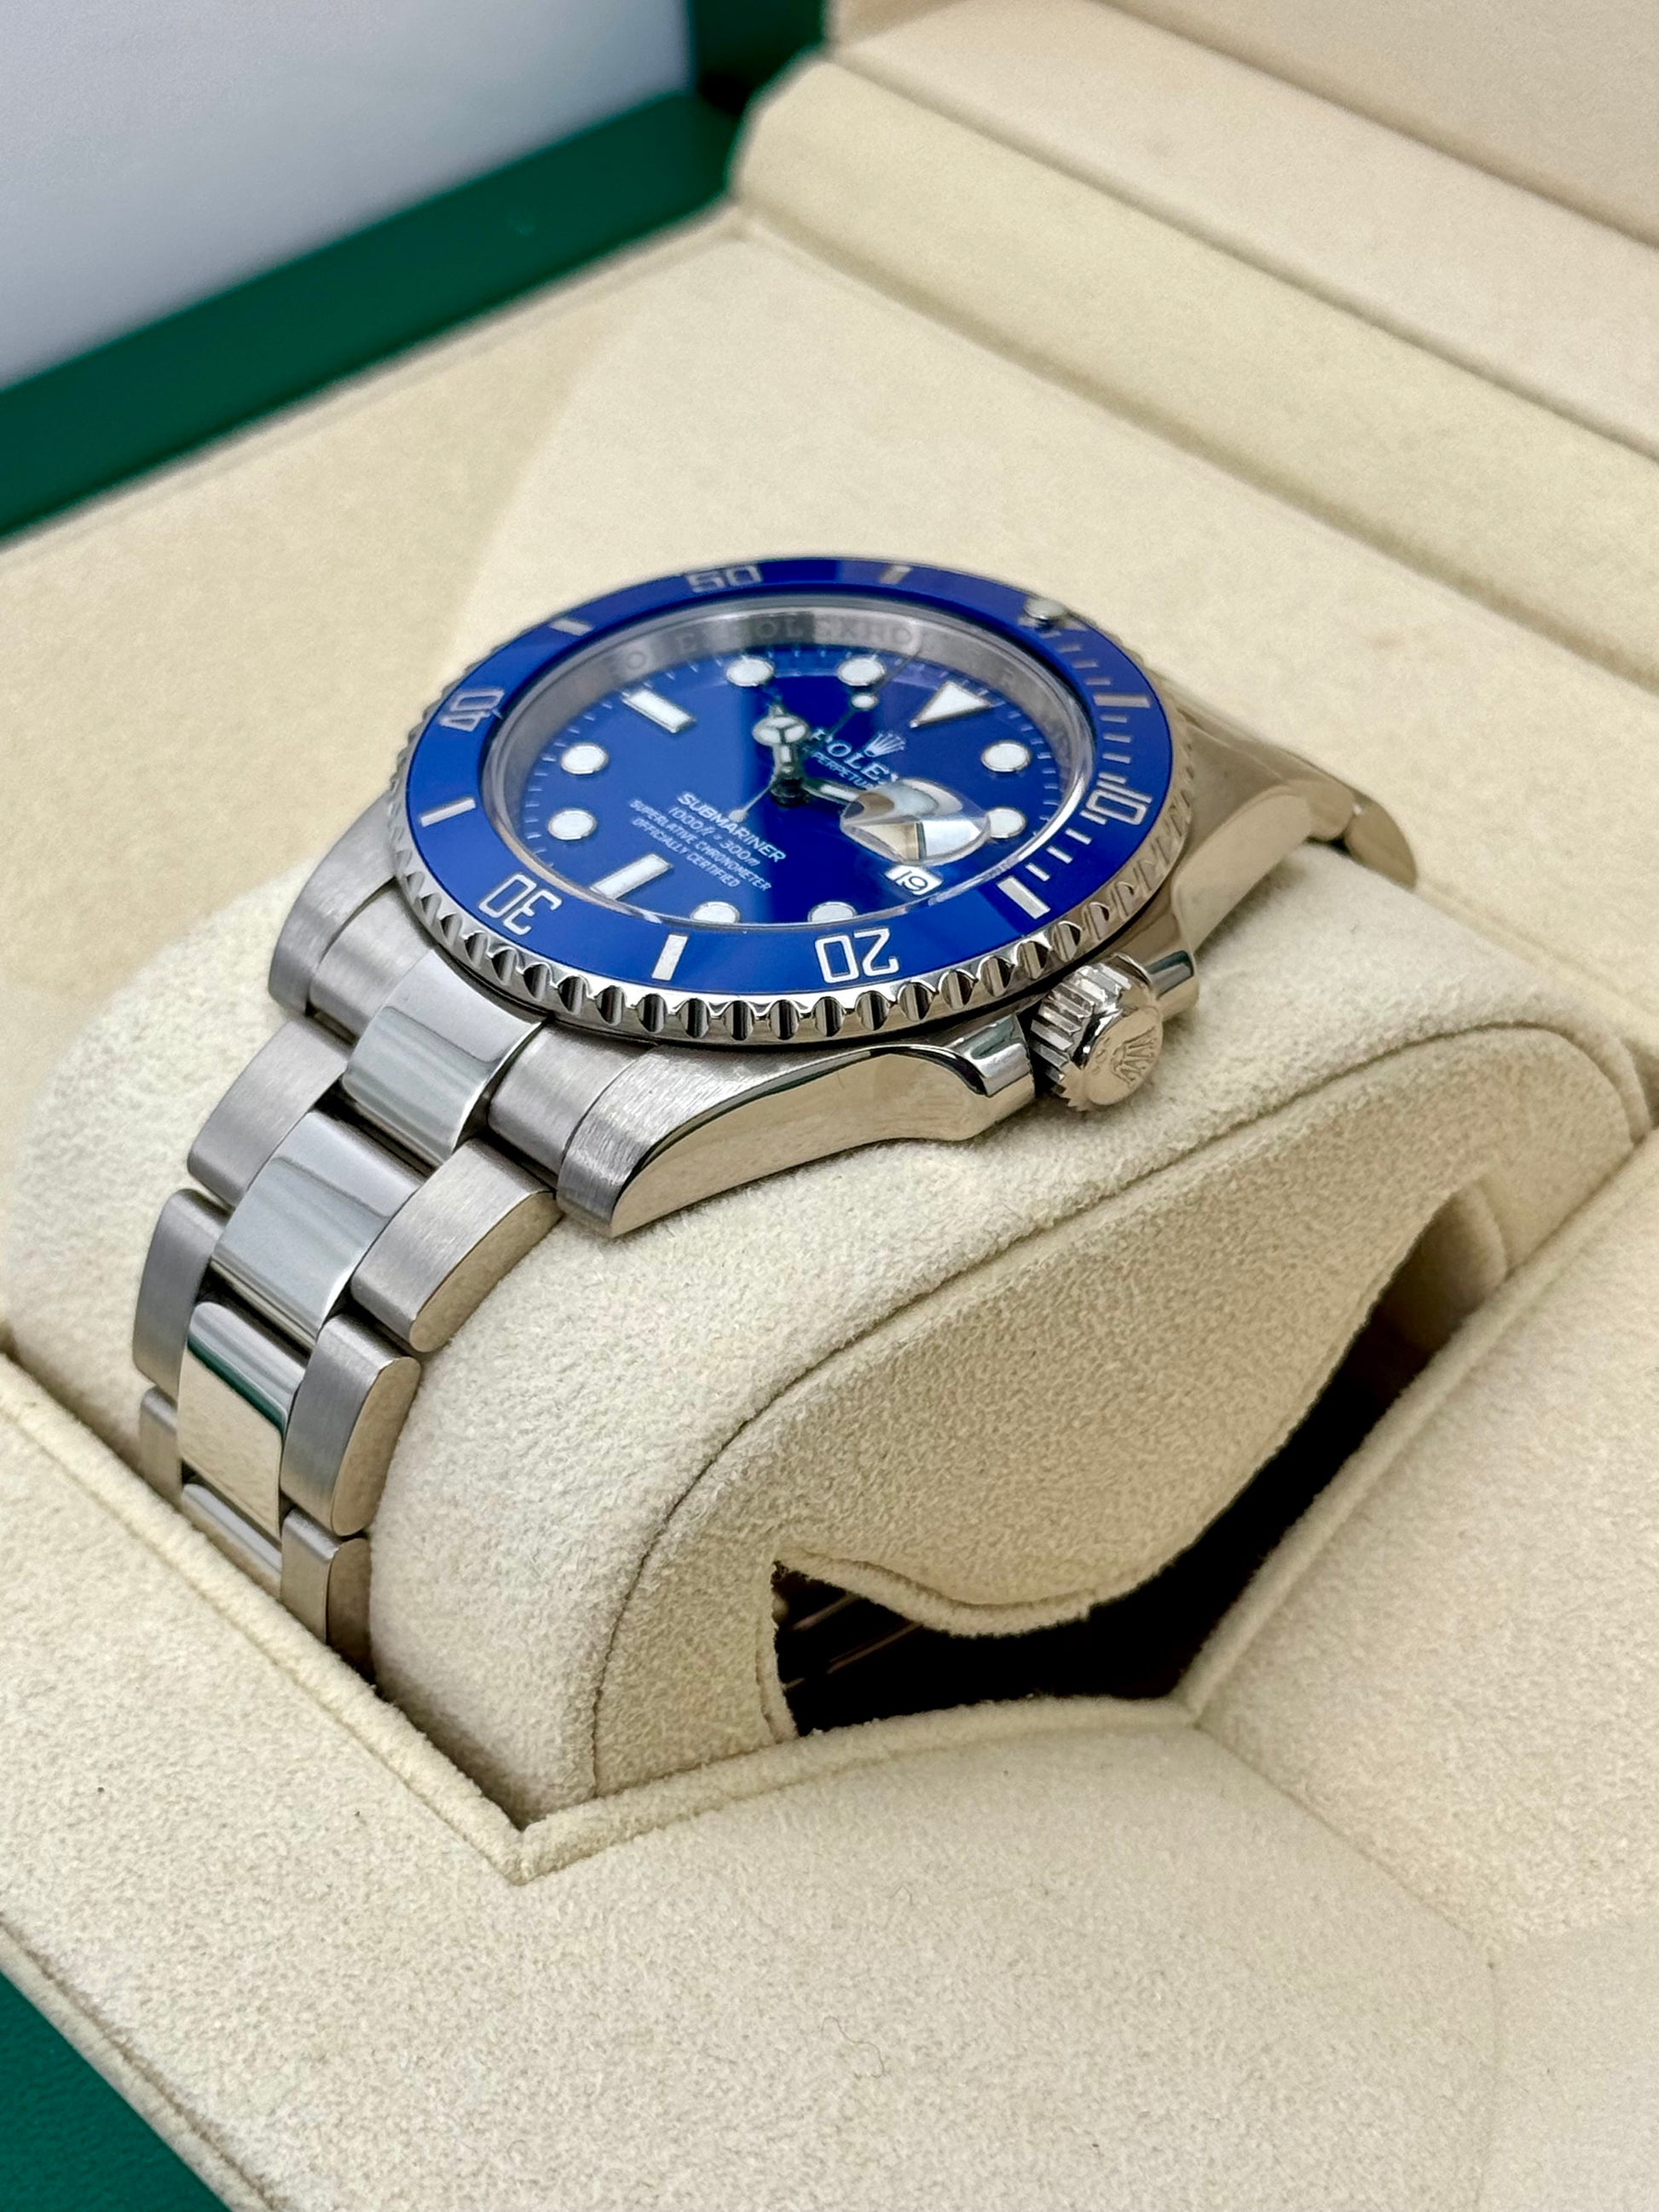 2018 Rolex Submariner "Smurf" 40mm 116619LB White Gold Blue Dial - MyWatchLLC